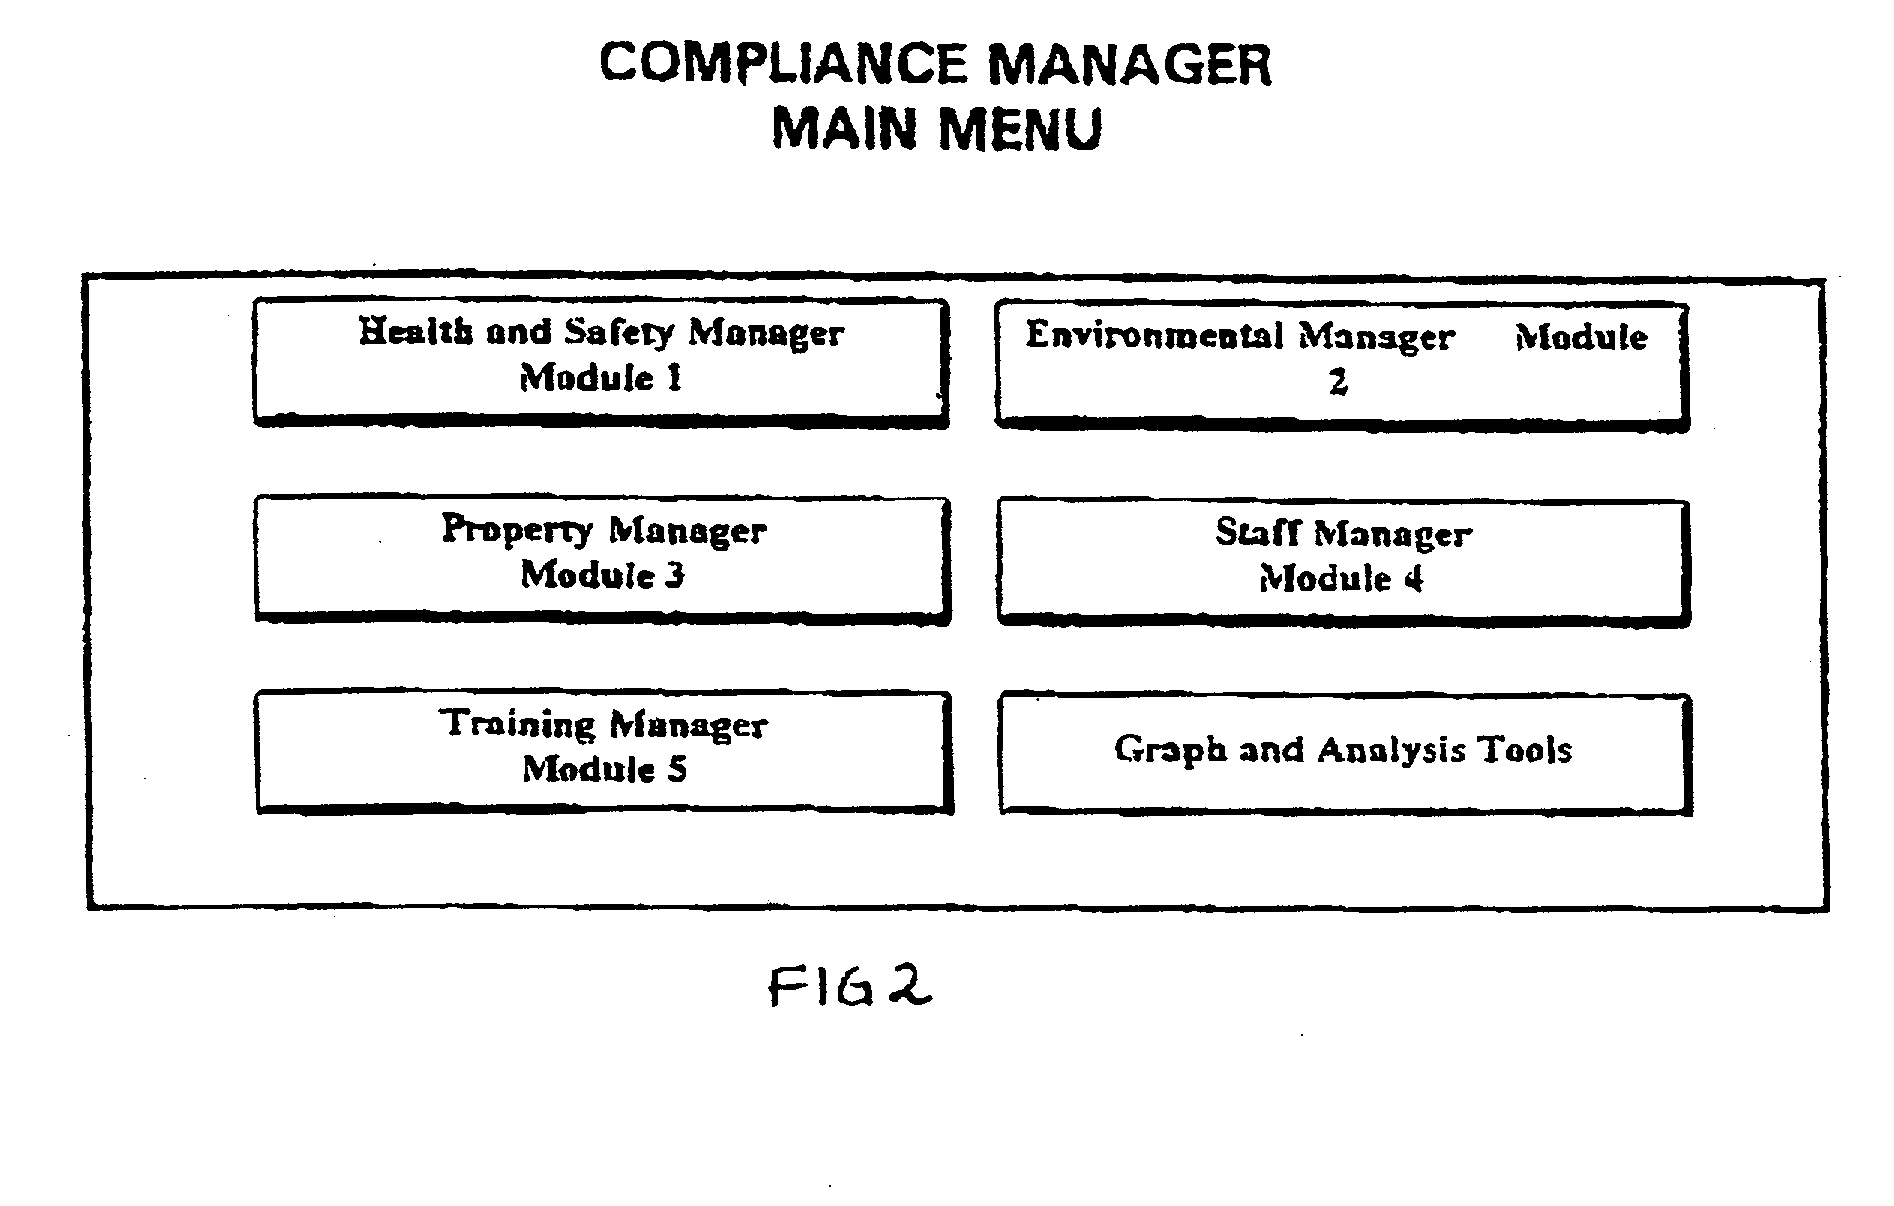 System and method for assisting an organization to implement and maintain compliance with various obligations